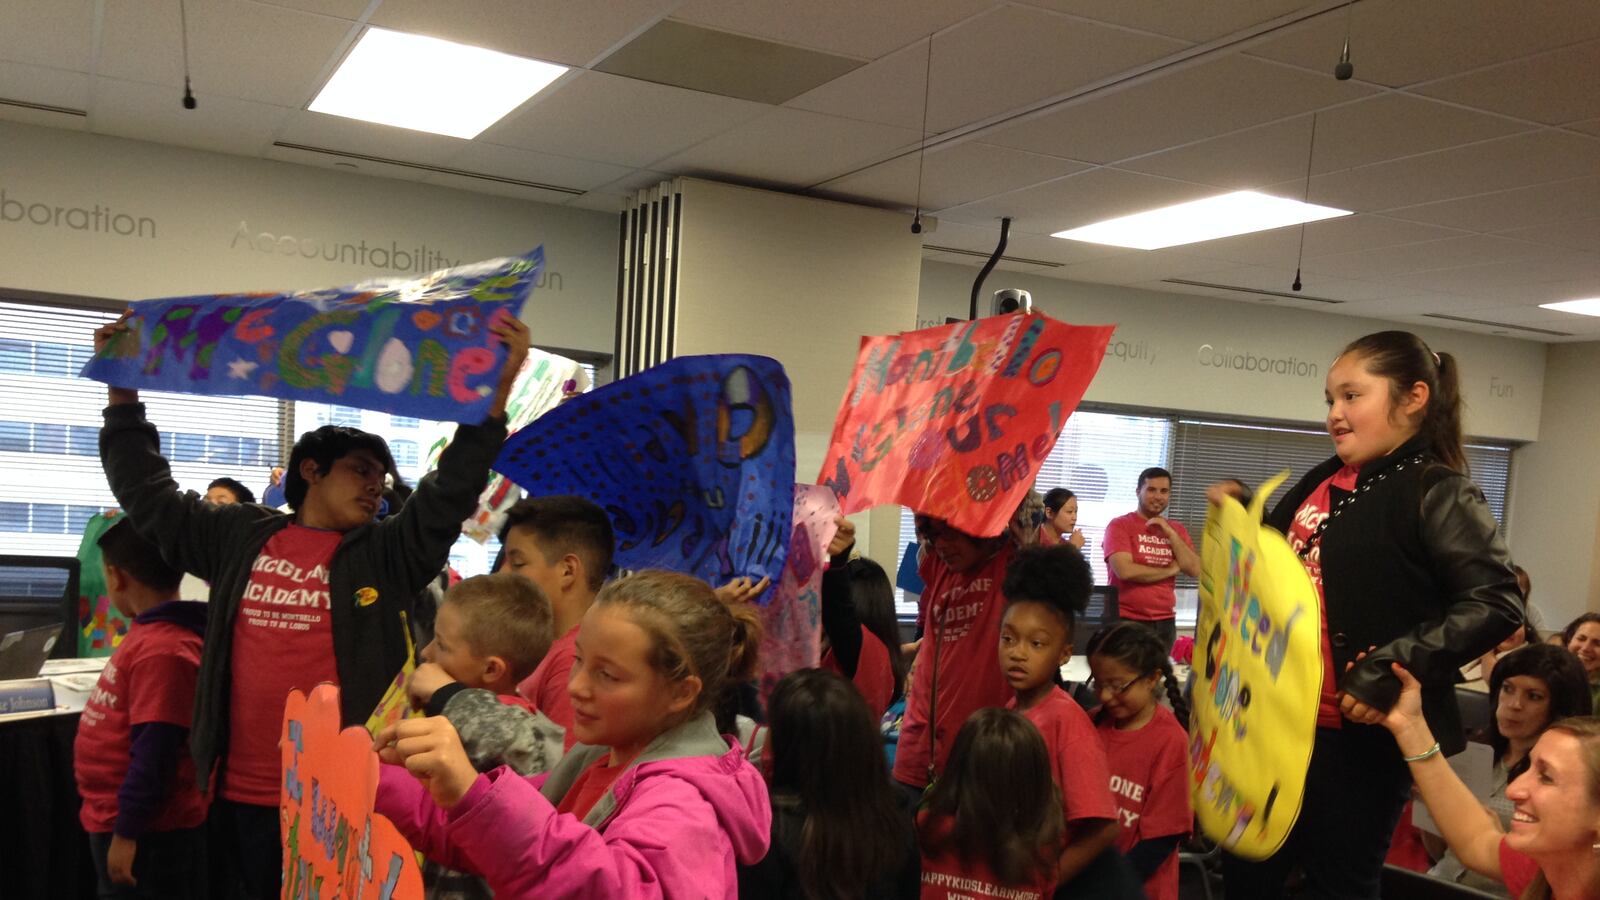 McGlone students hold signs in support of expansion at a recent school board meeting.